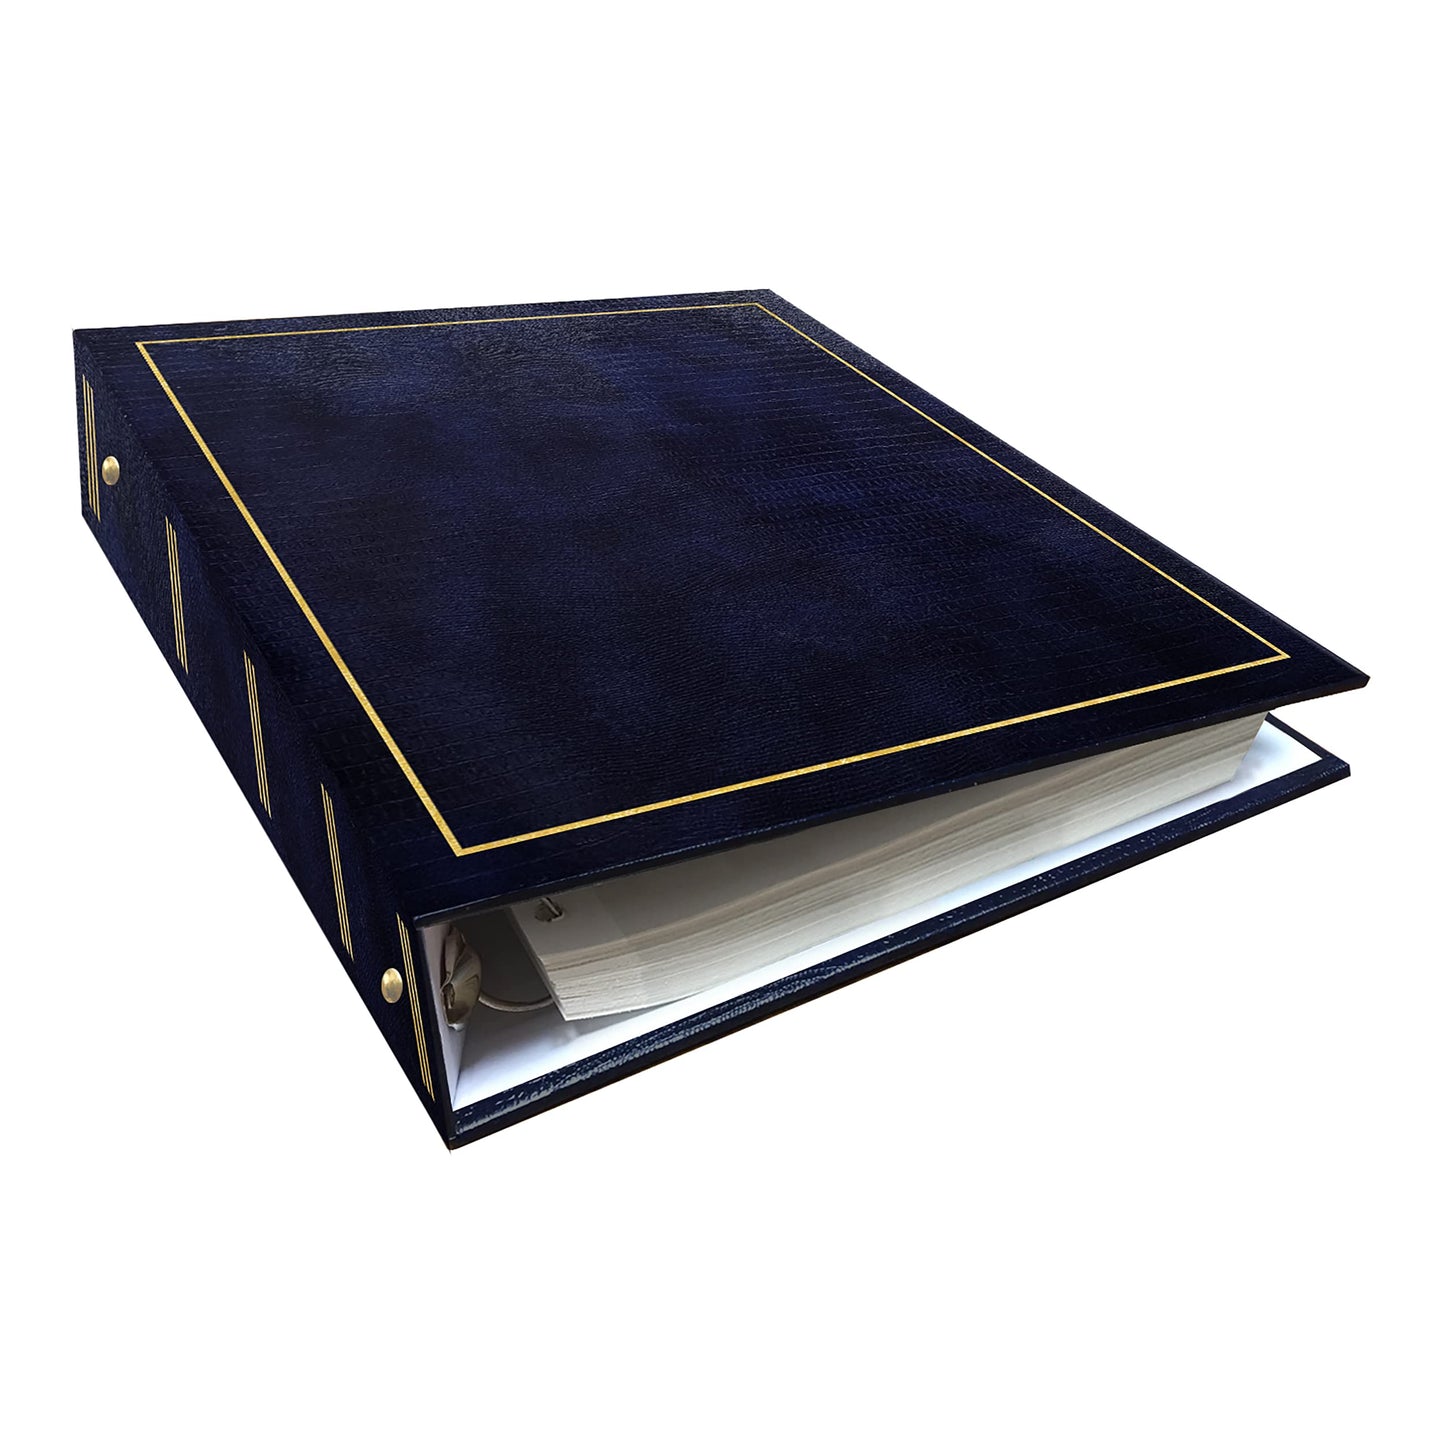 Pioneer Photo Albums Magnetic Self-Stick 3-Ring Album 100 Pages (50 Sheets), Navy Blue